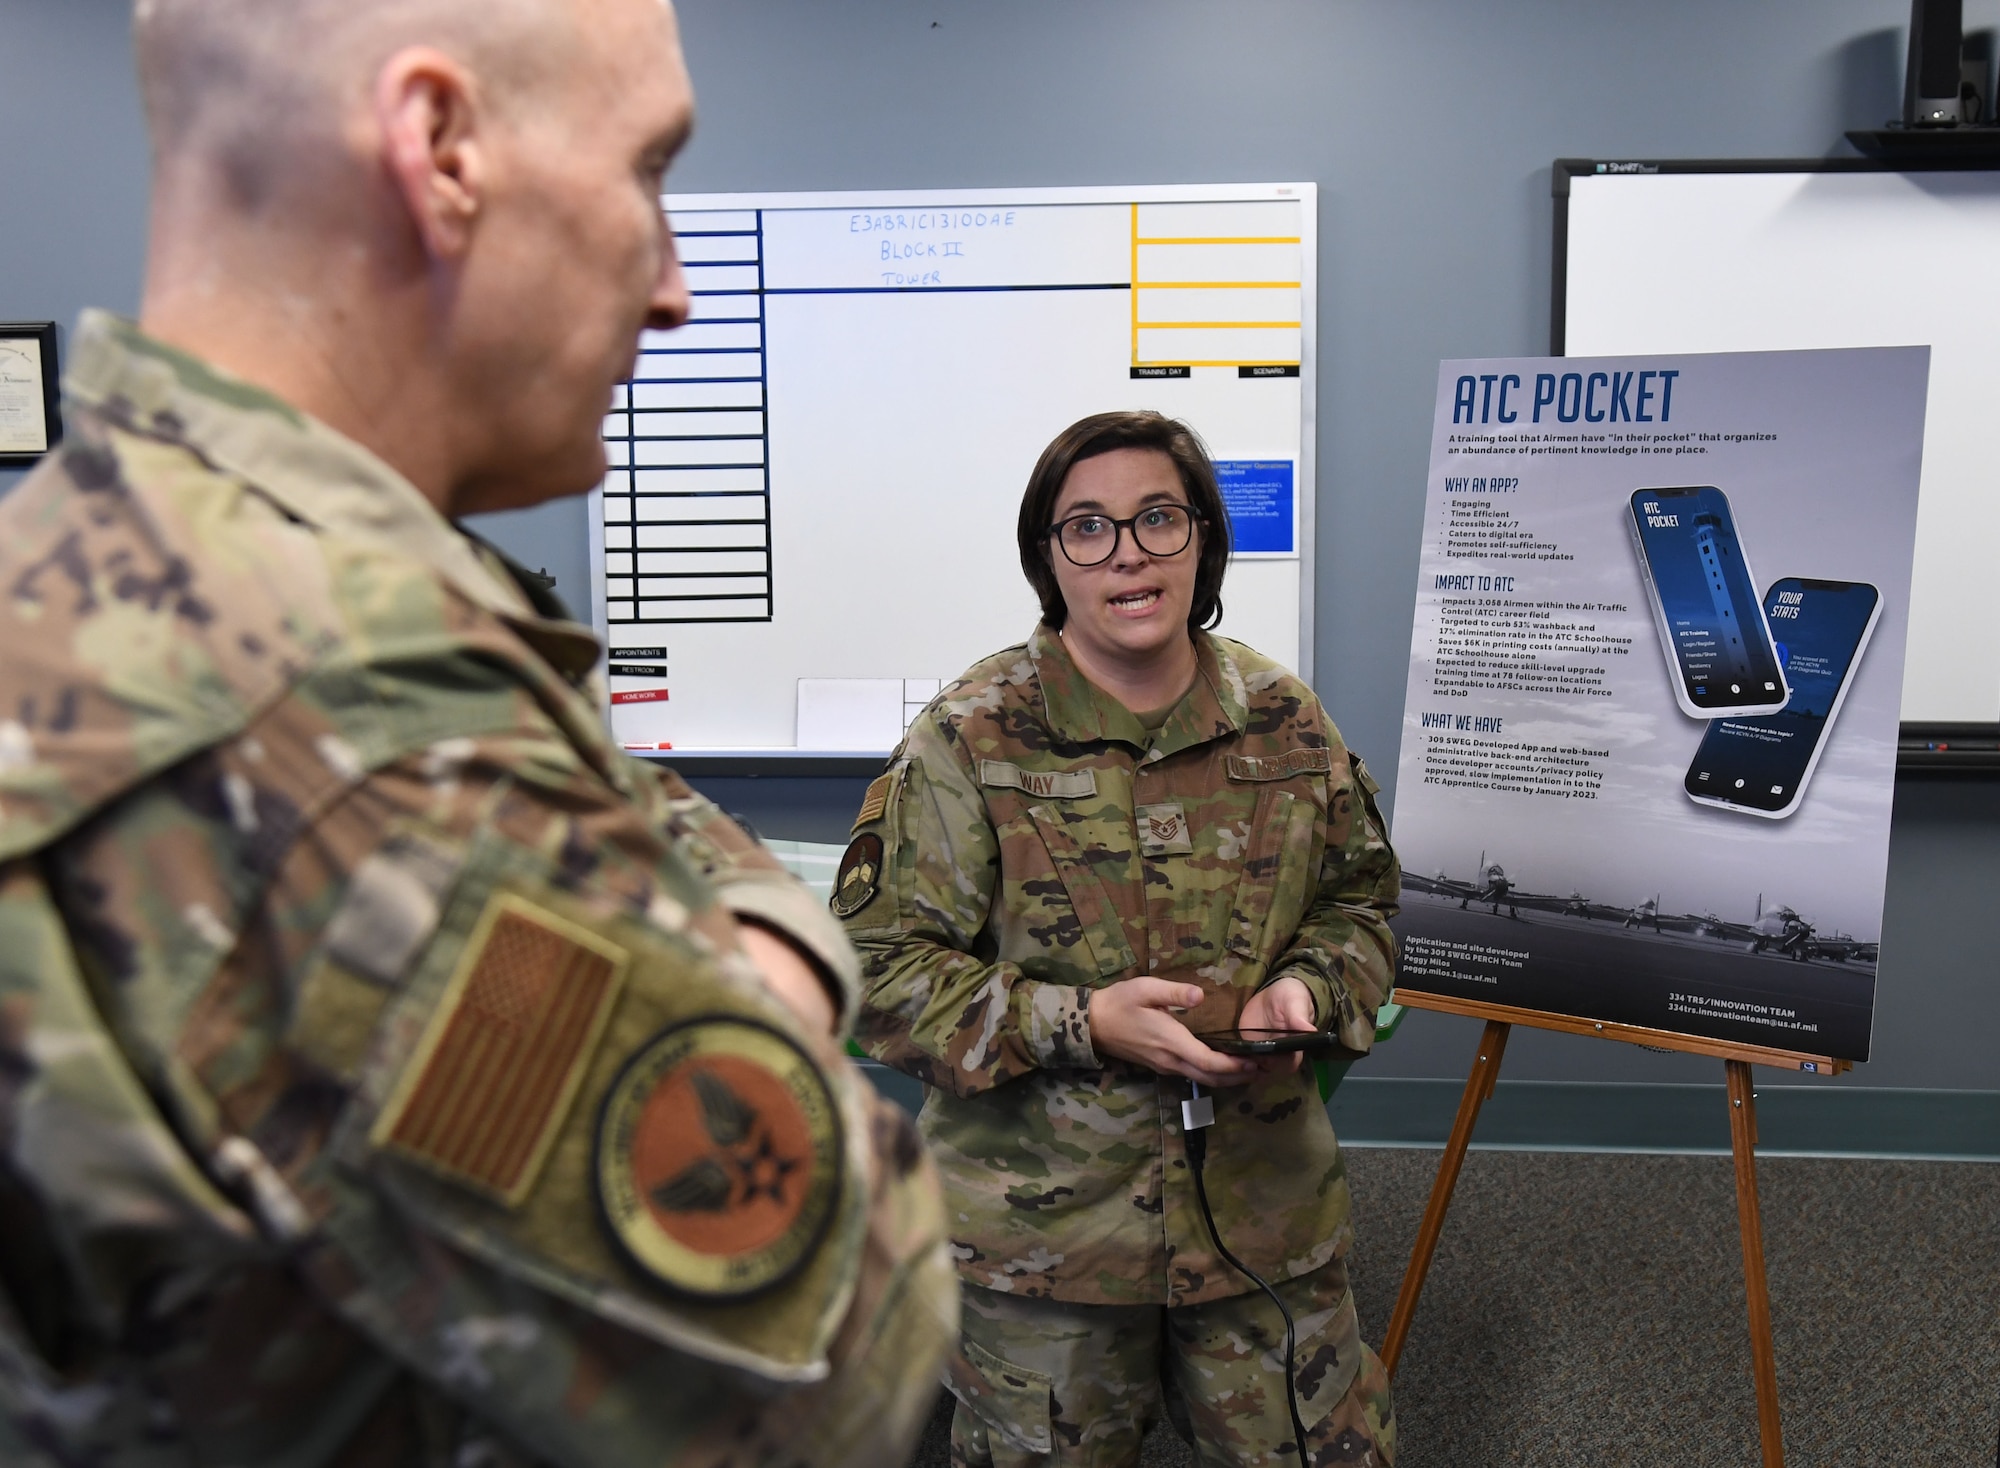 U.S. Air Force Tech. Sgt. Courtney Way, 334th Training Squadron instructor, provides an overview of the air traffic control pocket app capabilities to Gen. David Allvin, Vice Chief of Staff of the Air Force, inside Cody Hall at Keesler Air Force Base, Mississippi, Nov. 18, 2022.